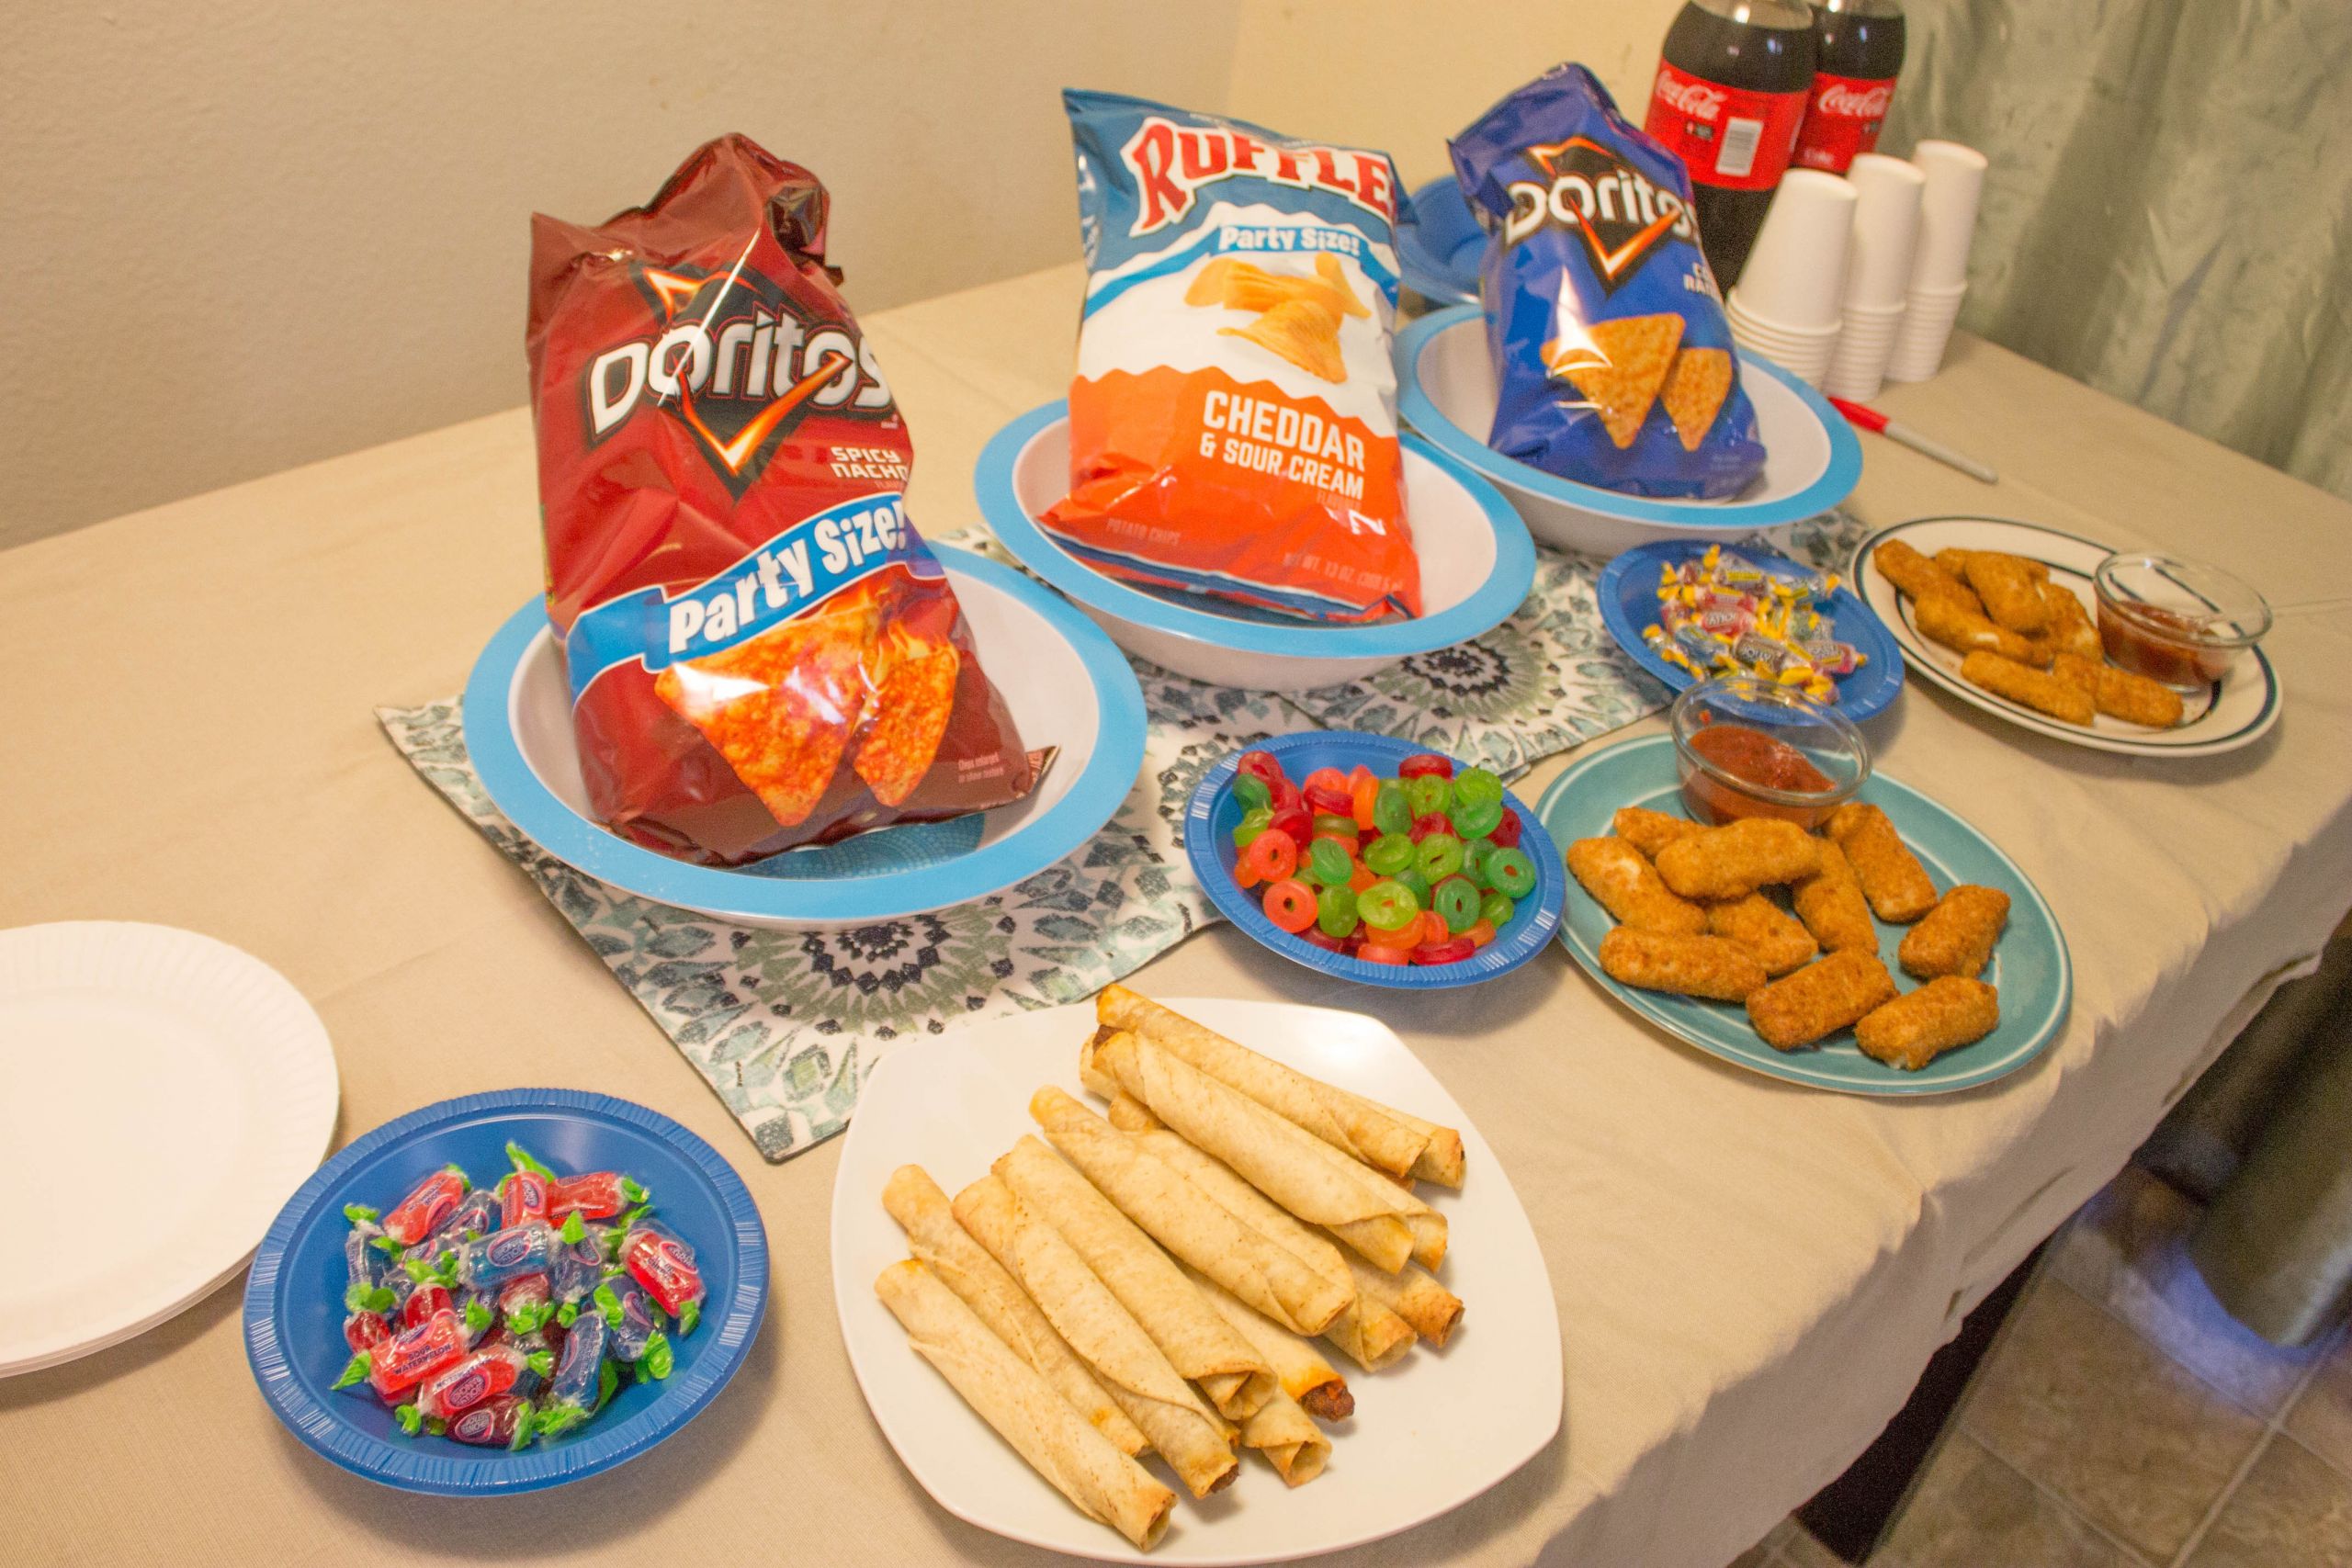 Teenage Party Food Ideas
 The Night Before His Surgery I Threw My Teen a Slumber Party